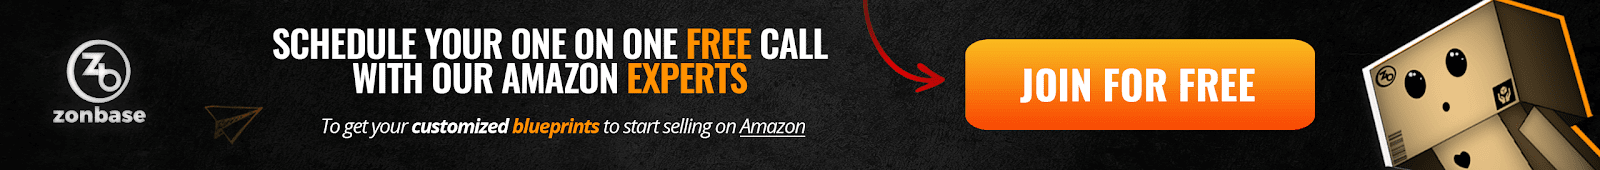 Free Help To Sell Your Amazon products!